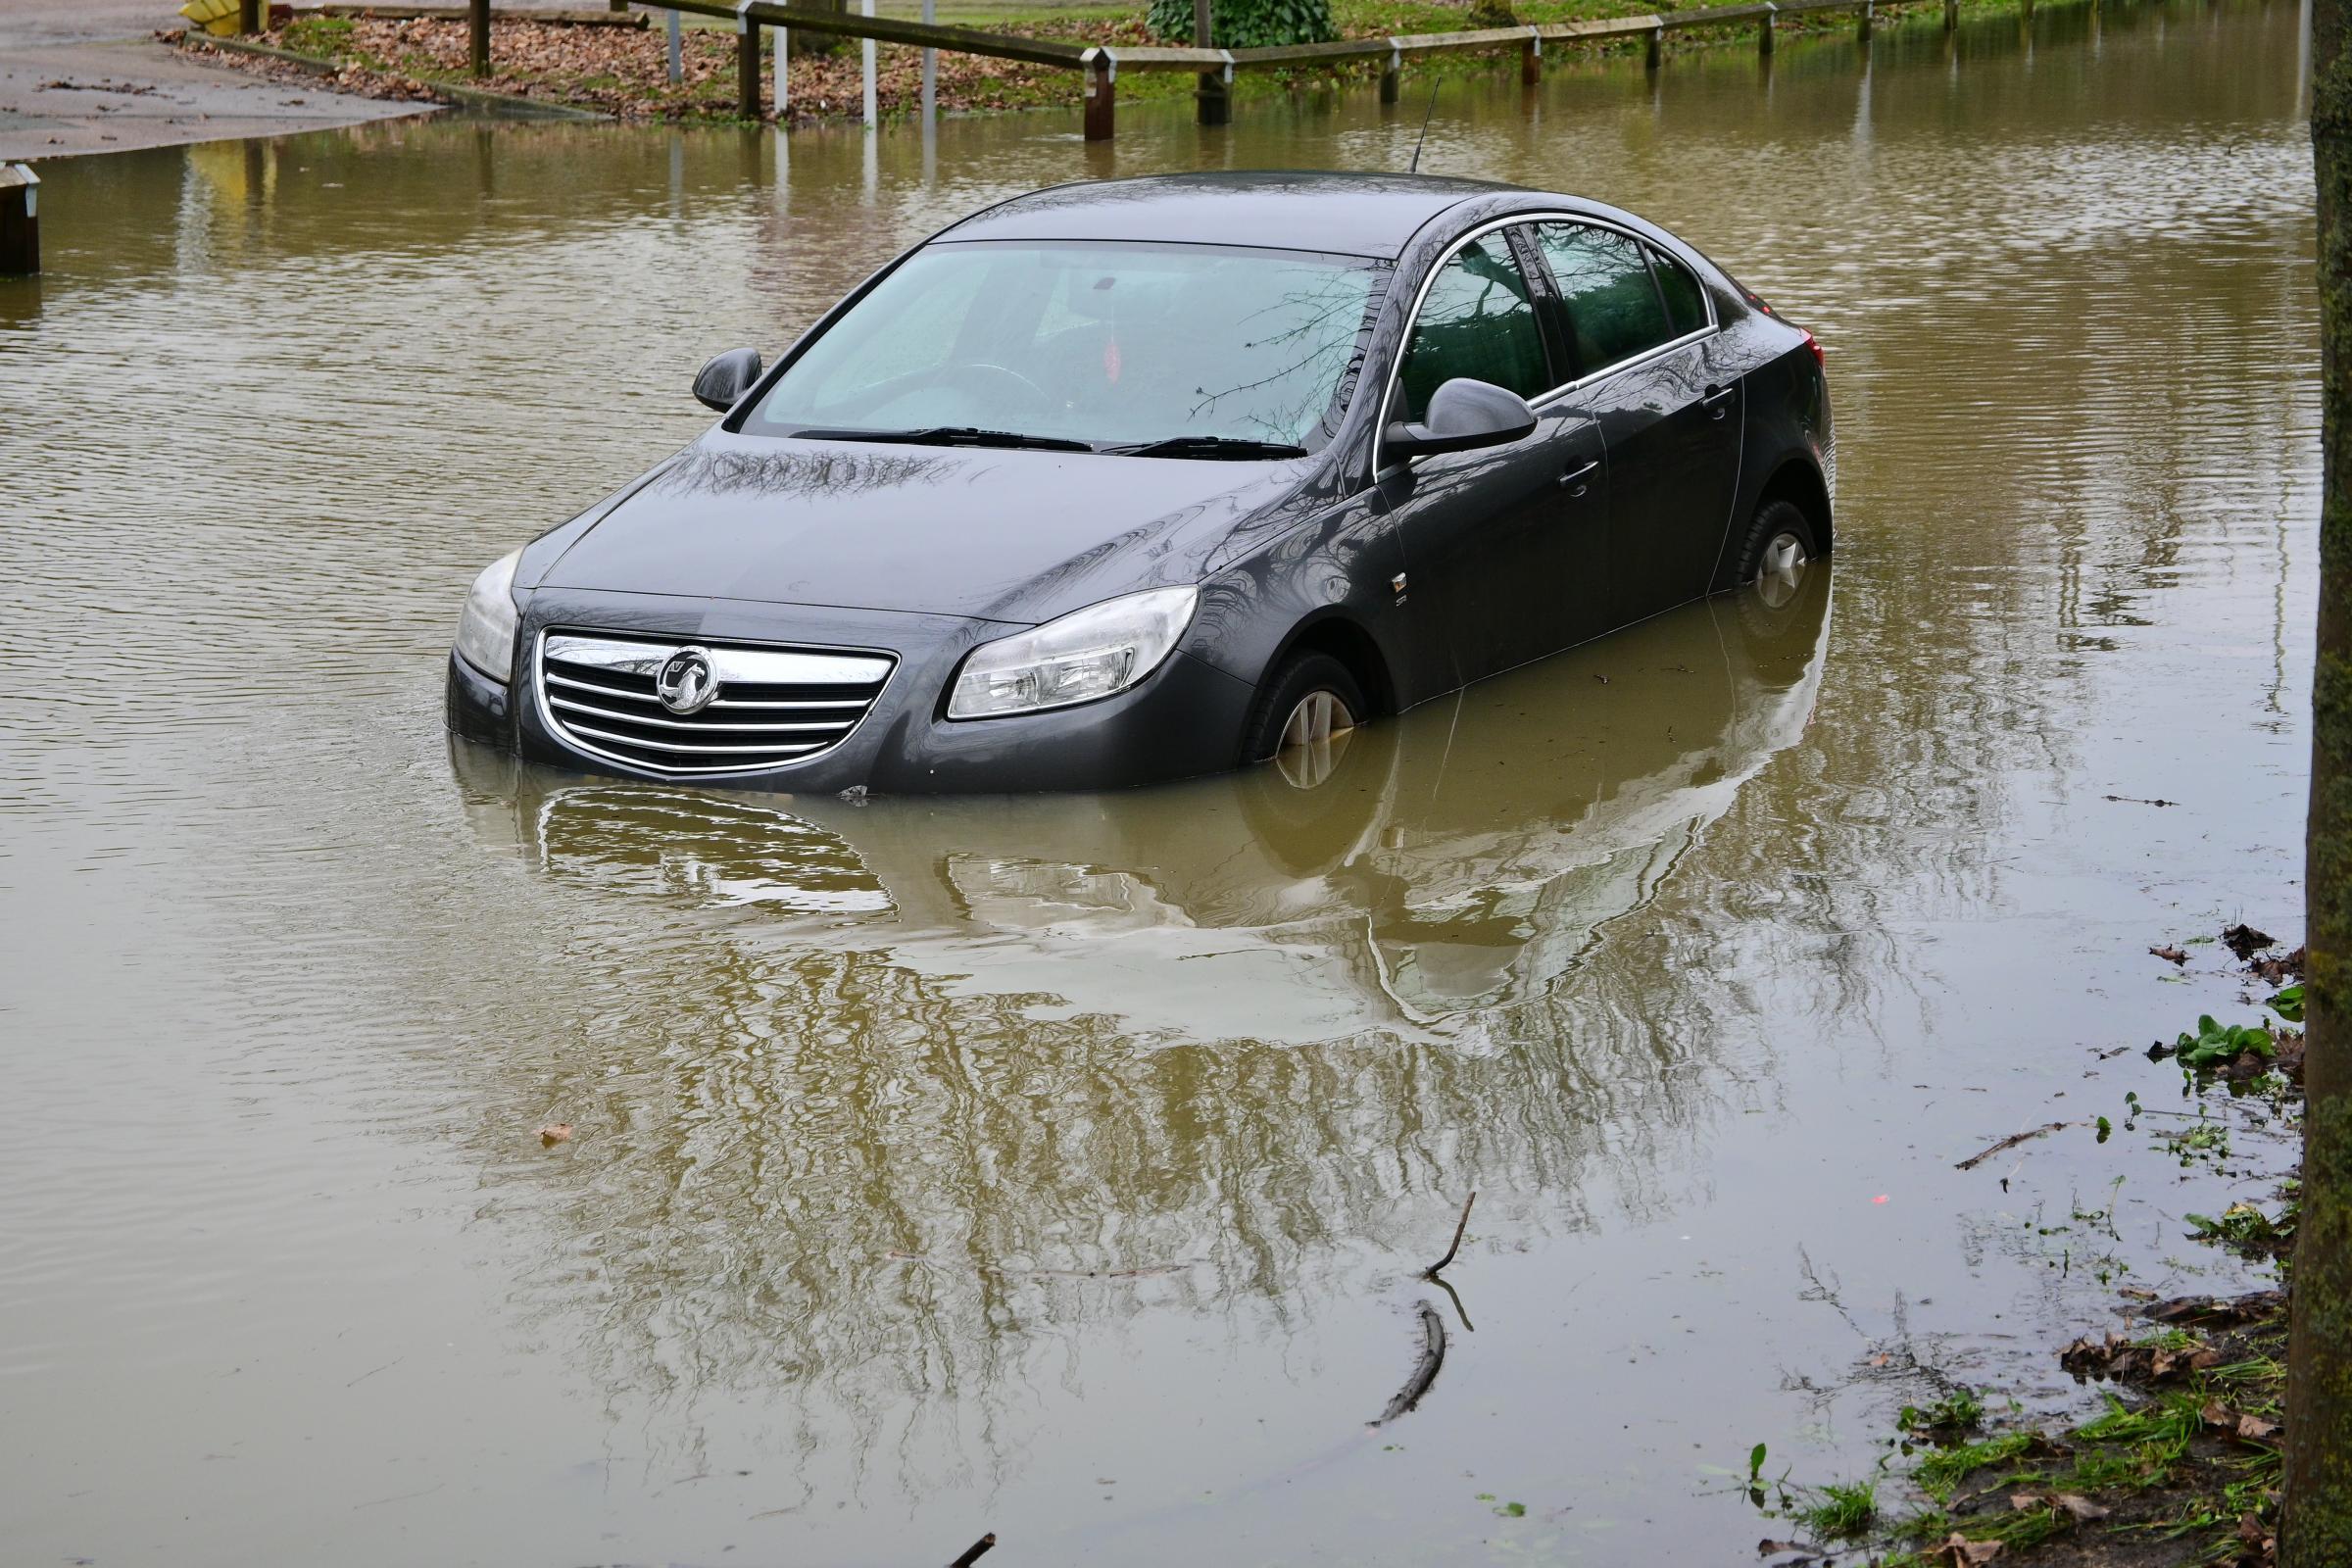 Images show flooding in Water Lane, Watford on February 31. Photos: Rory Robinson